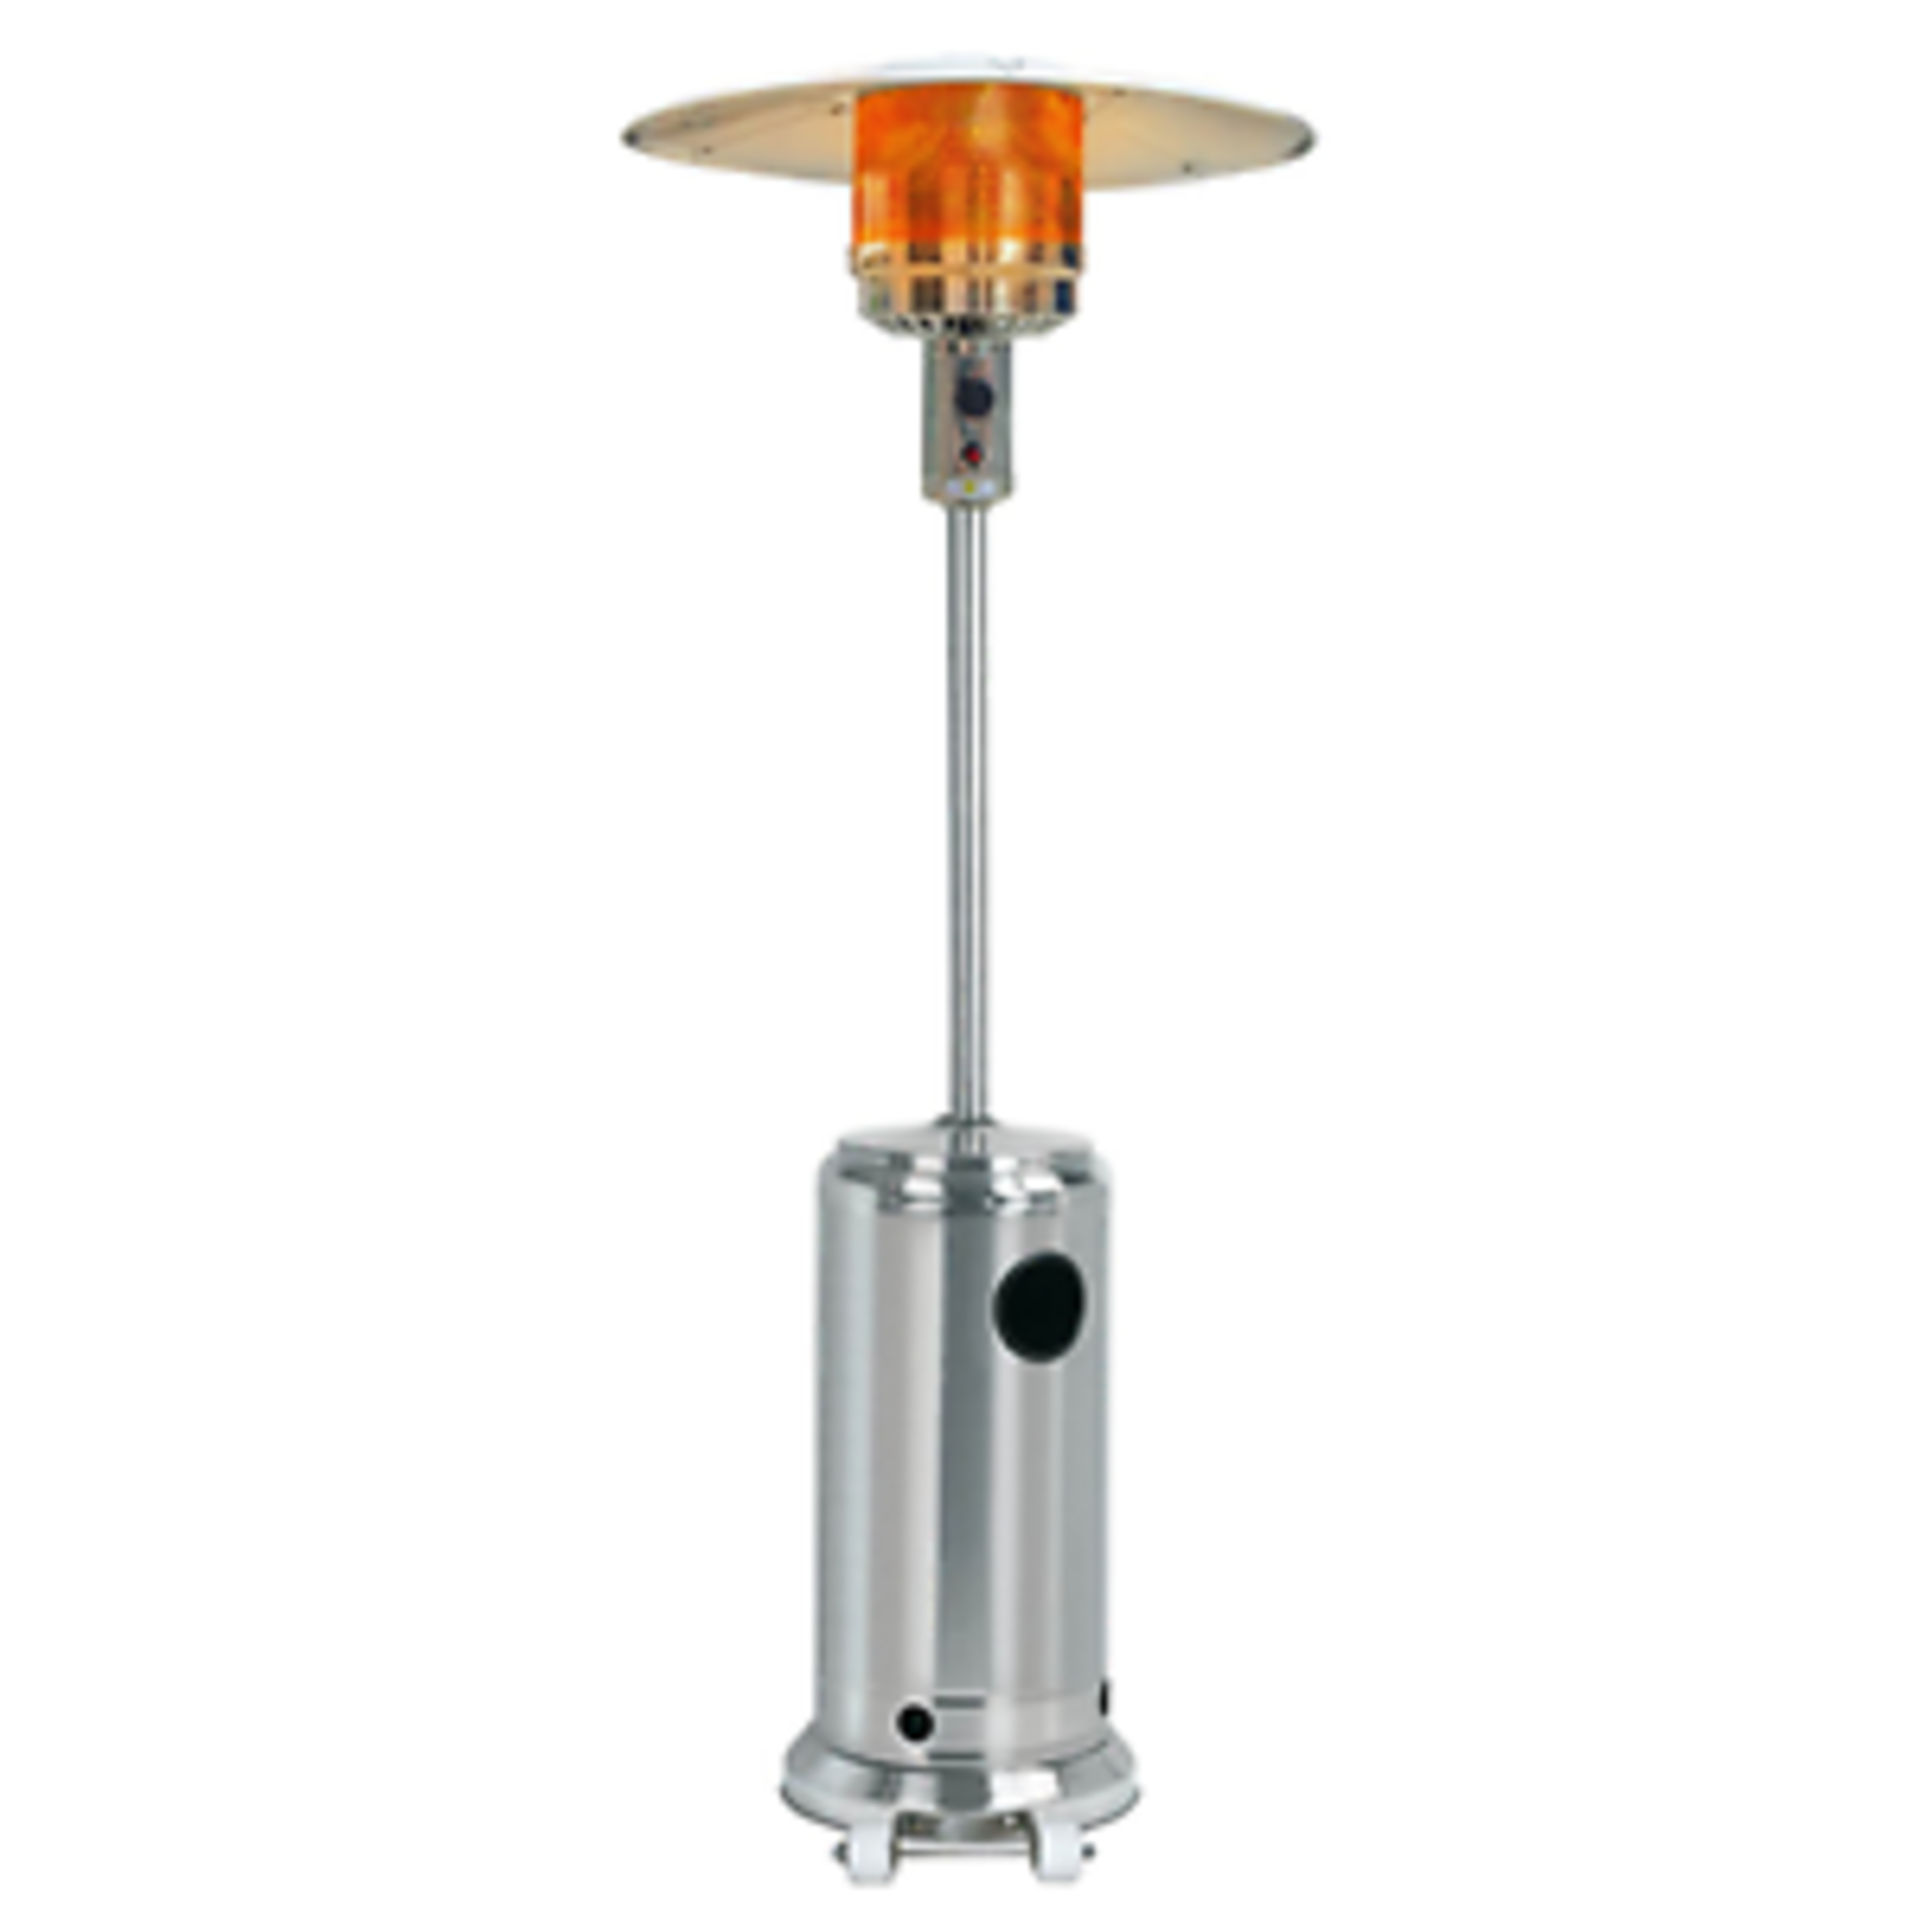 1 x Brand New & Boxed 13KW Stainless Steel Gas Patio Heater C/W regulator and wheels.